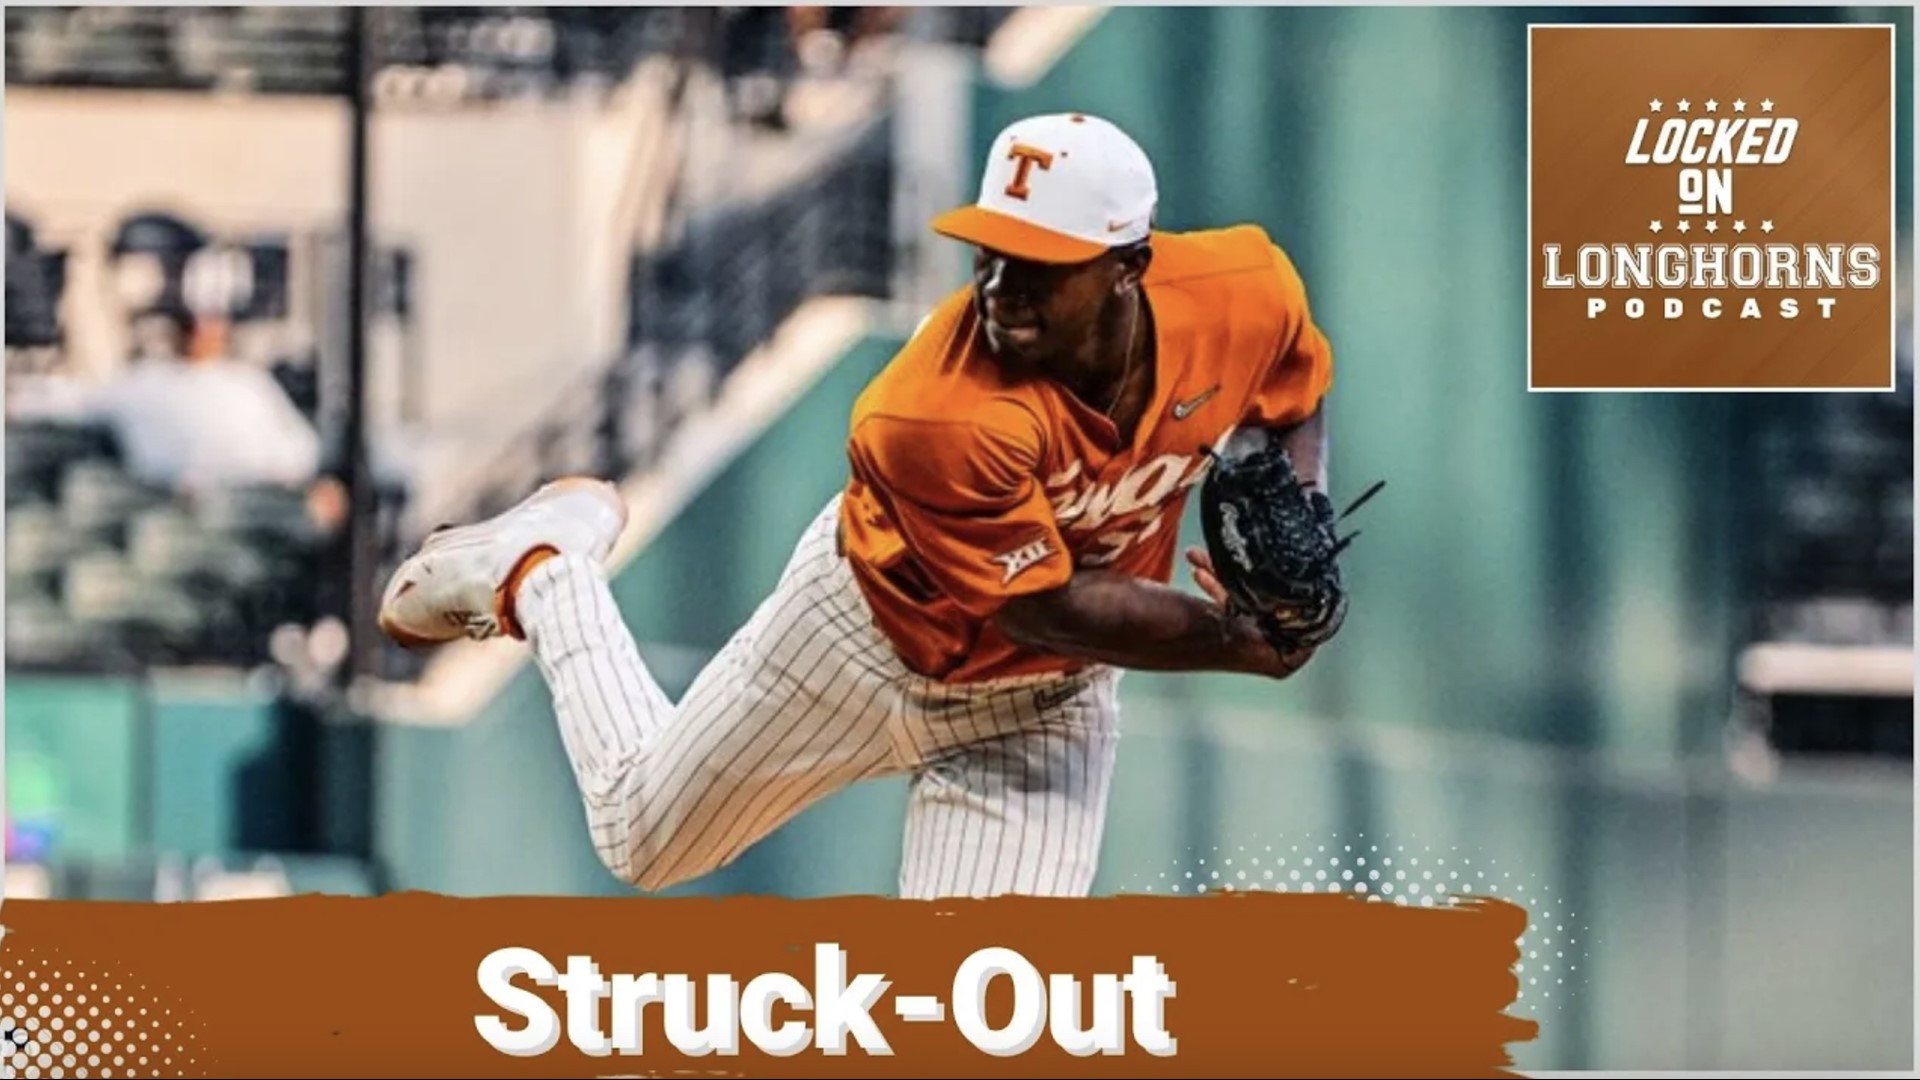 The Texas Longhorns Baseball Team are the gold standard when it comes to College Baseball, so much so that the term "Omahorns" has been coined.